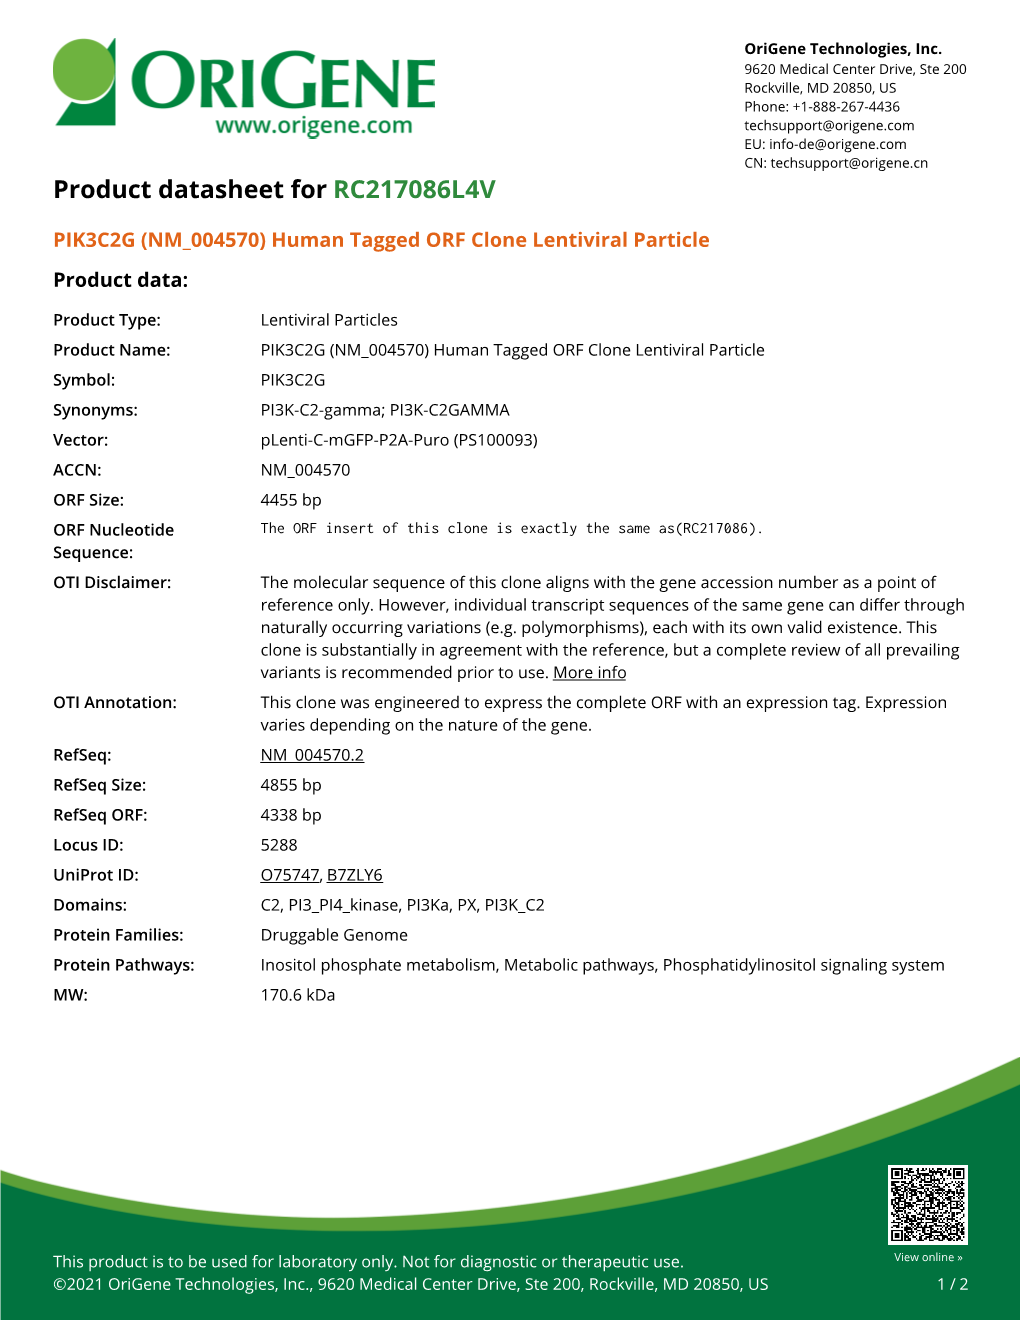 PIK3C2G (NM 004570) Human Tagged ORF Clone Lentiviral Particle Product Data